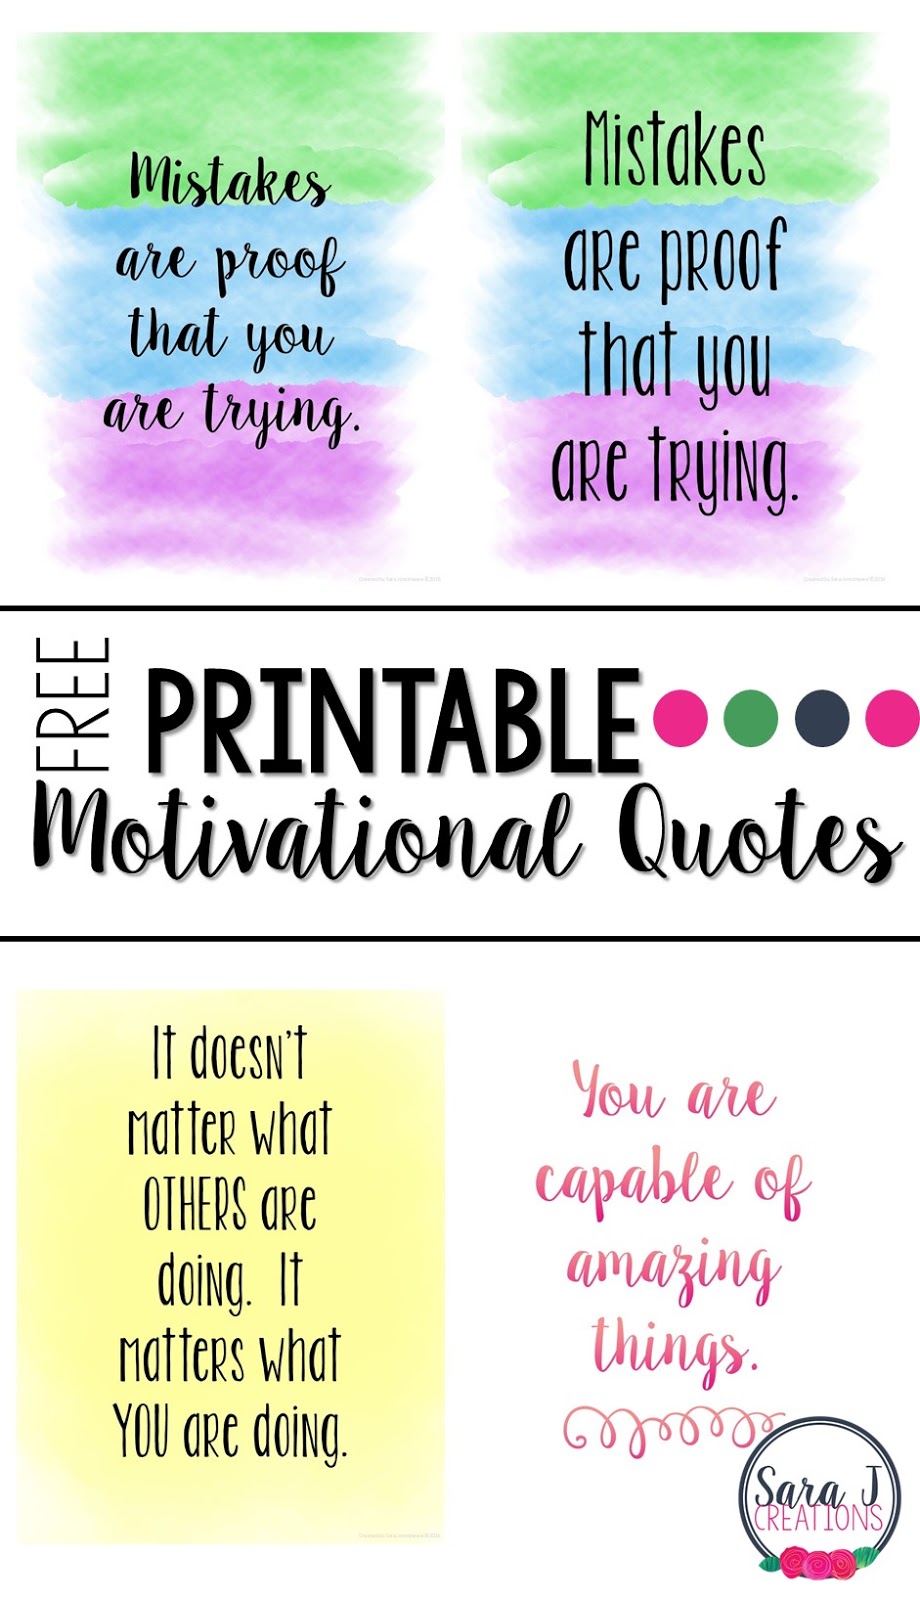 Get Motivated + Free Printable Quotes | Sara J Creations